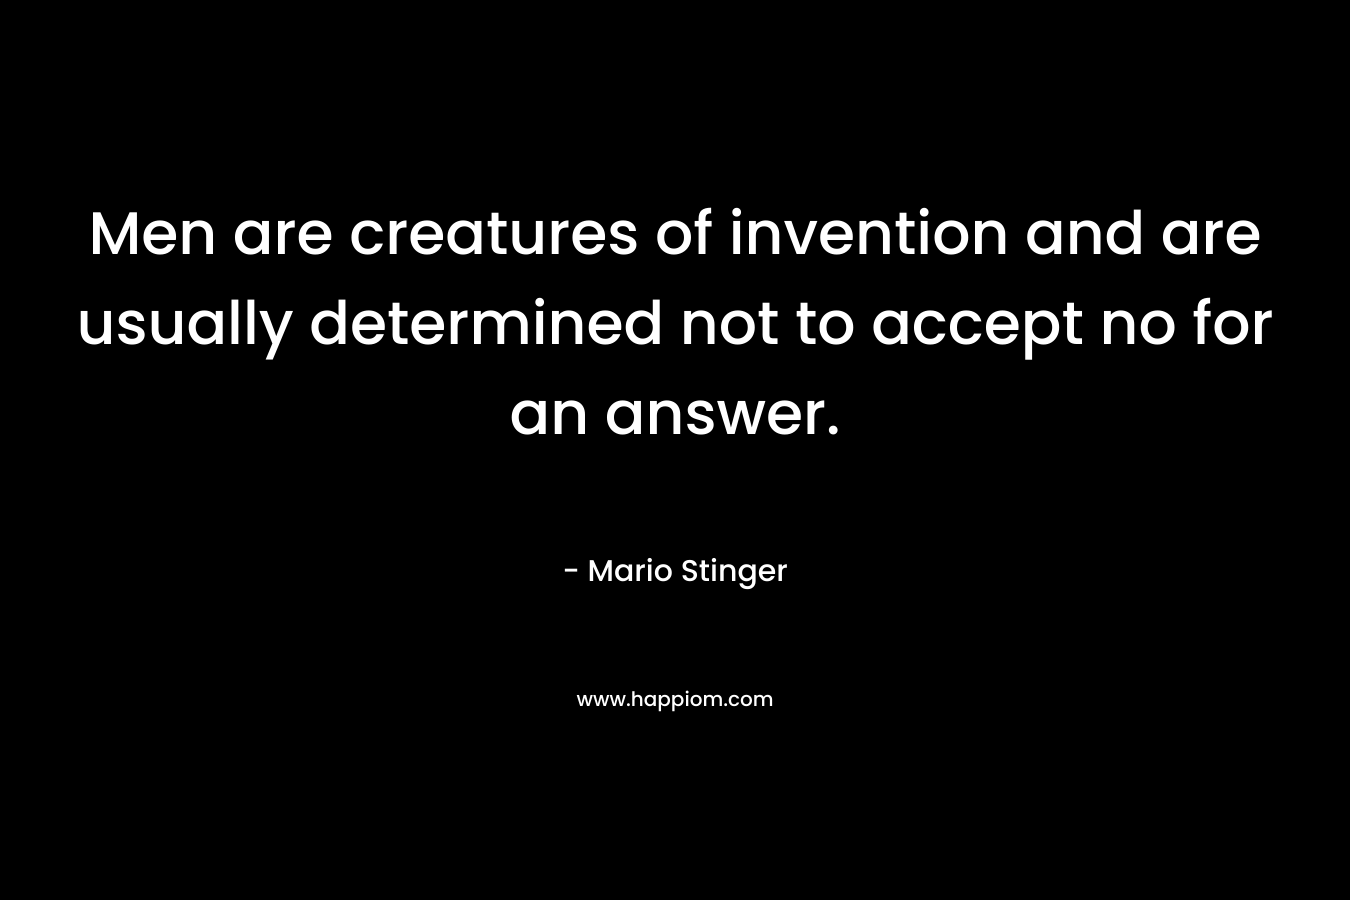 Men are creatures of invention and are usually determined not to accept no for an answer. – Mario Stinger